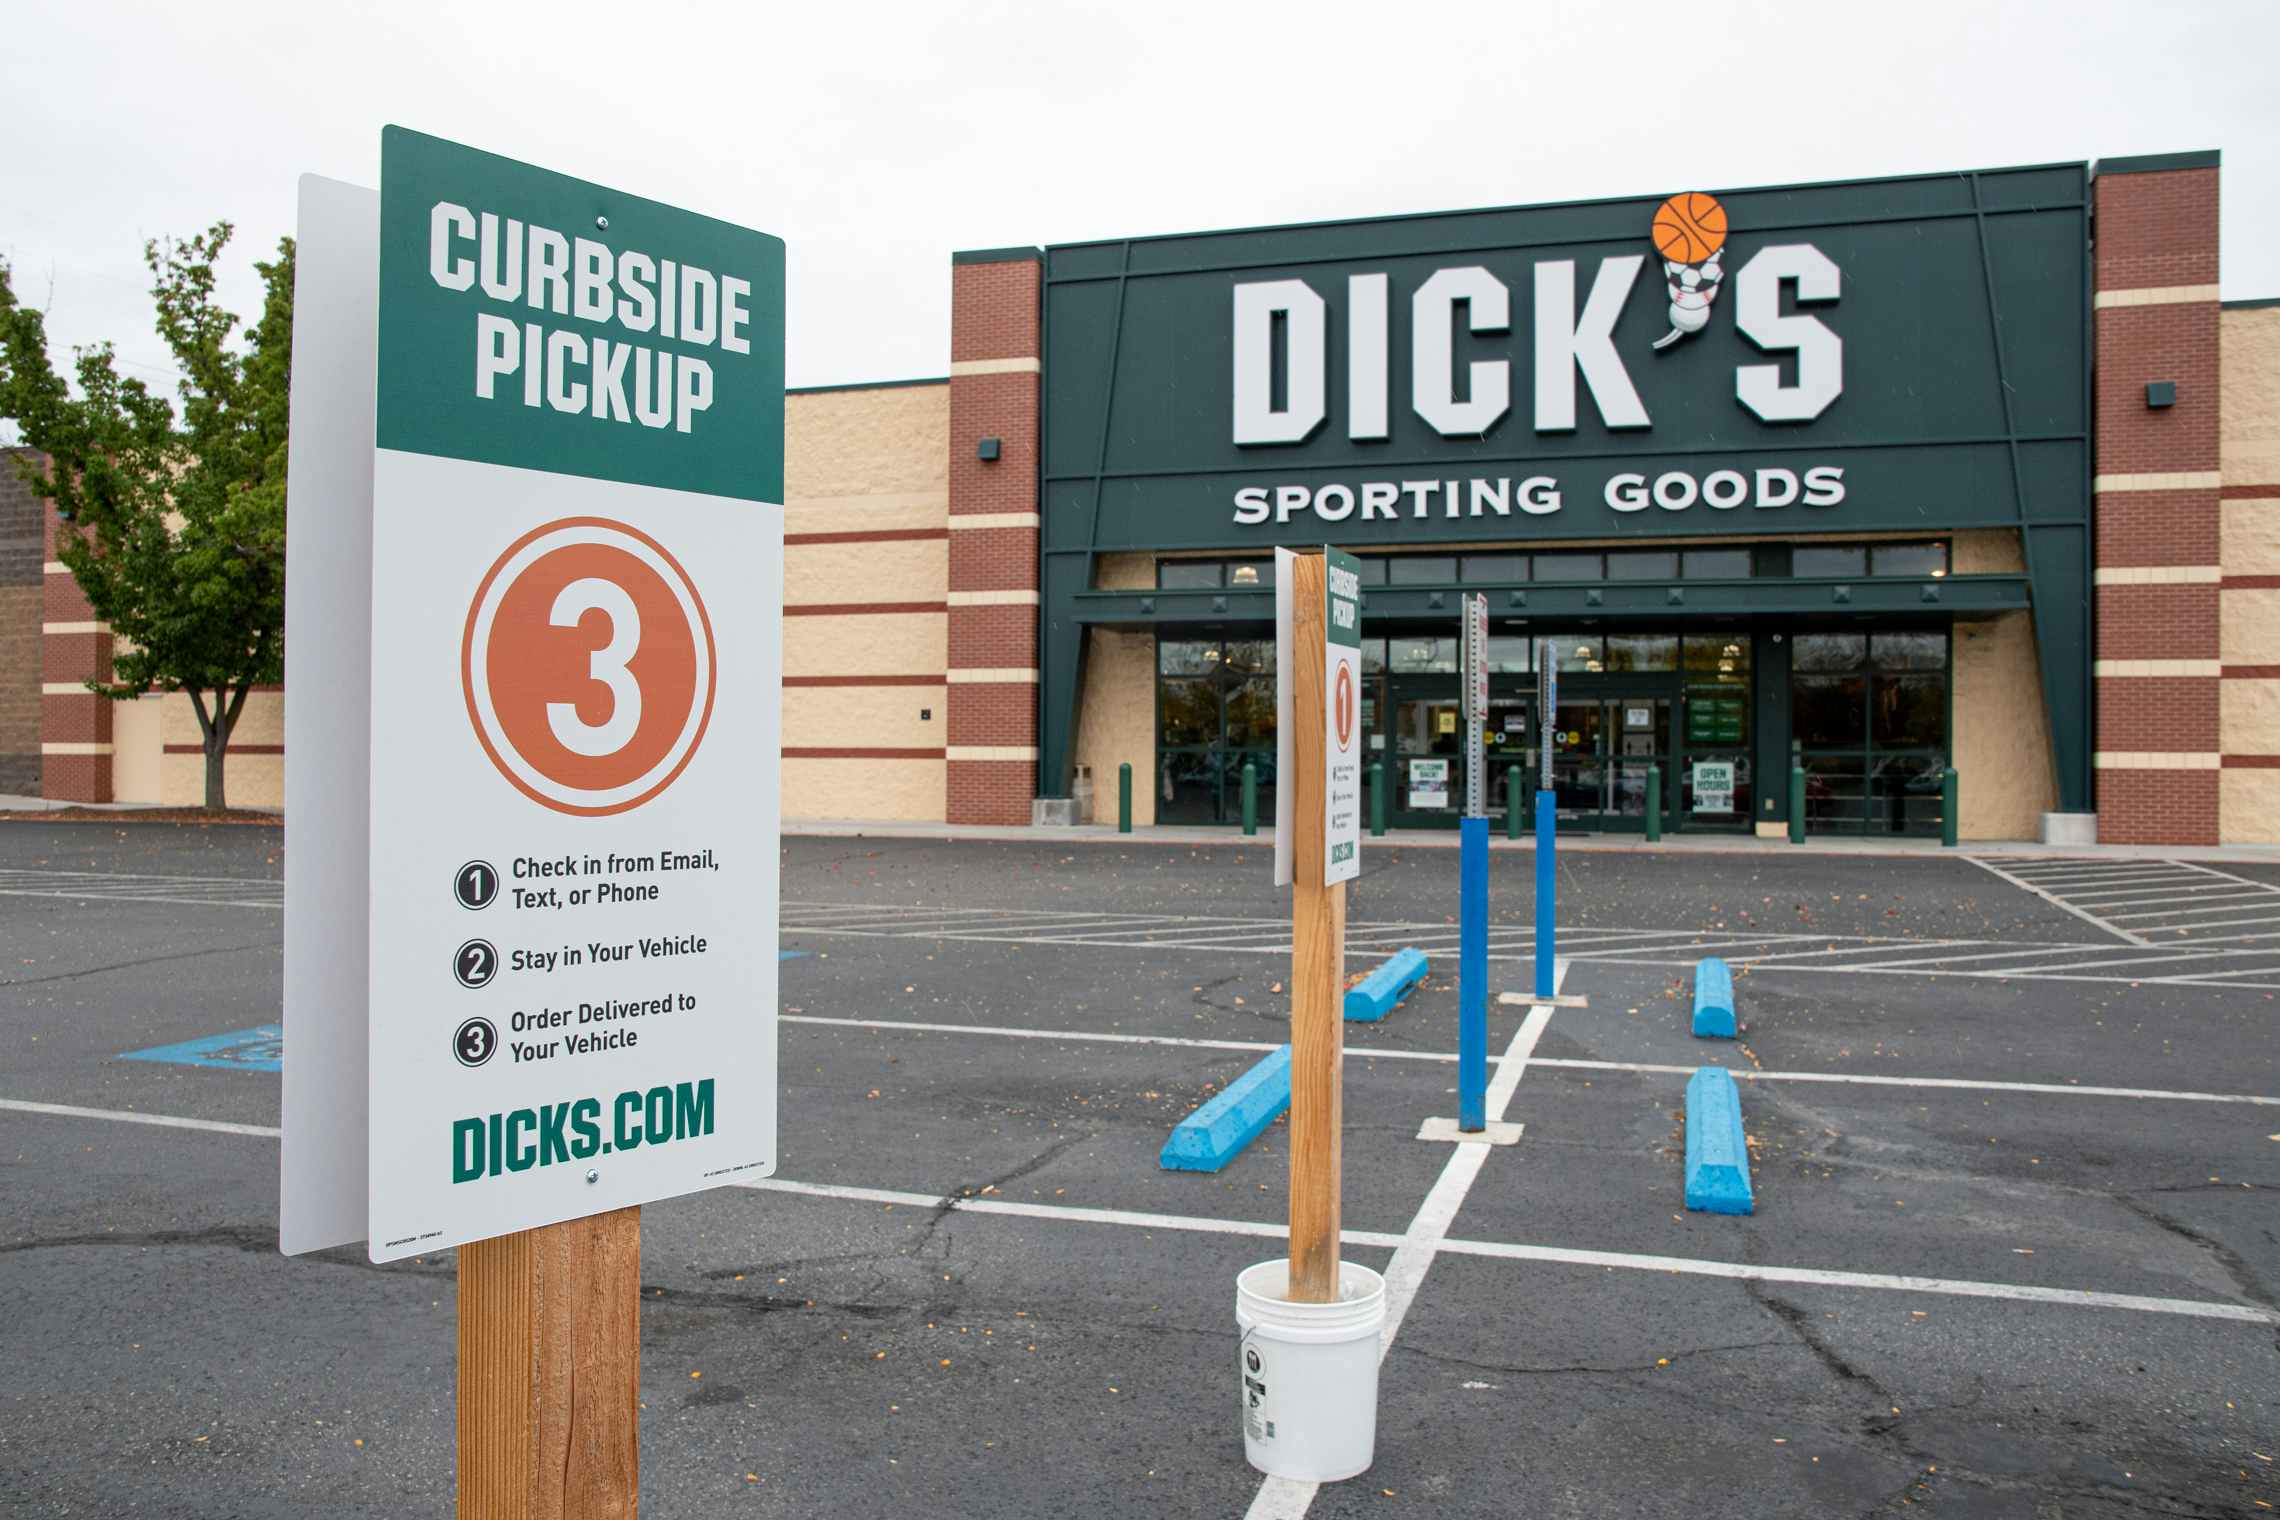 Dicks sporting goods store front with curbside pickup sign